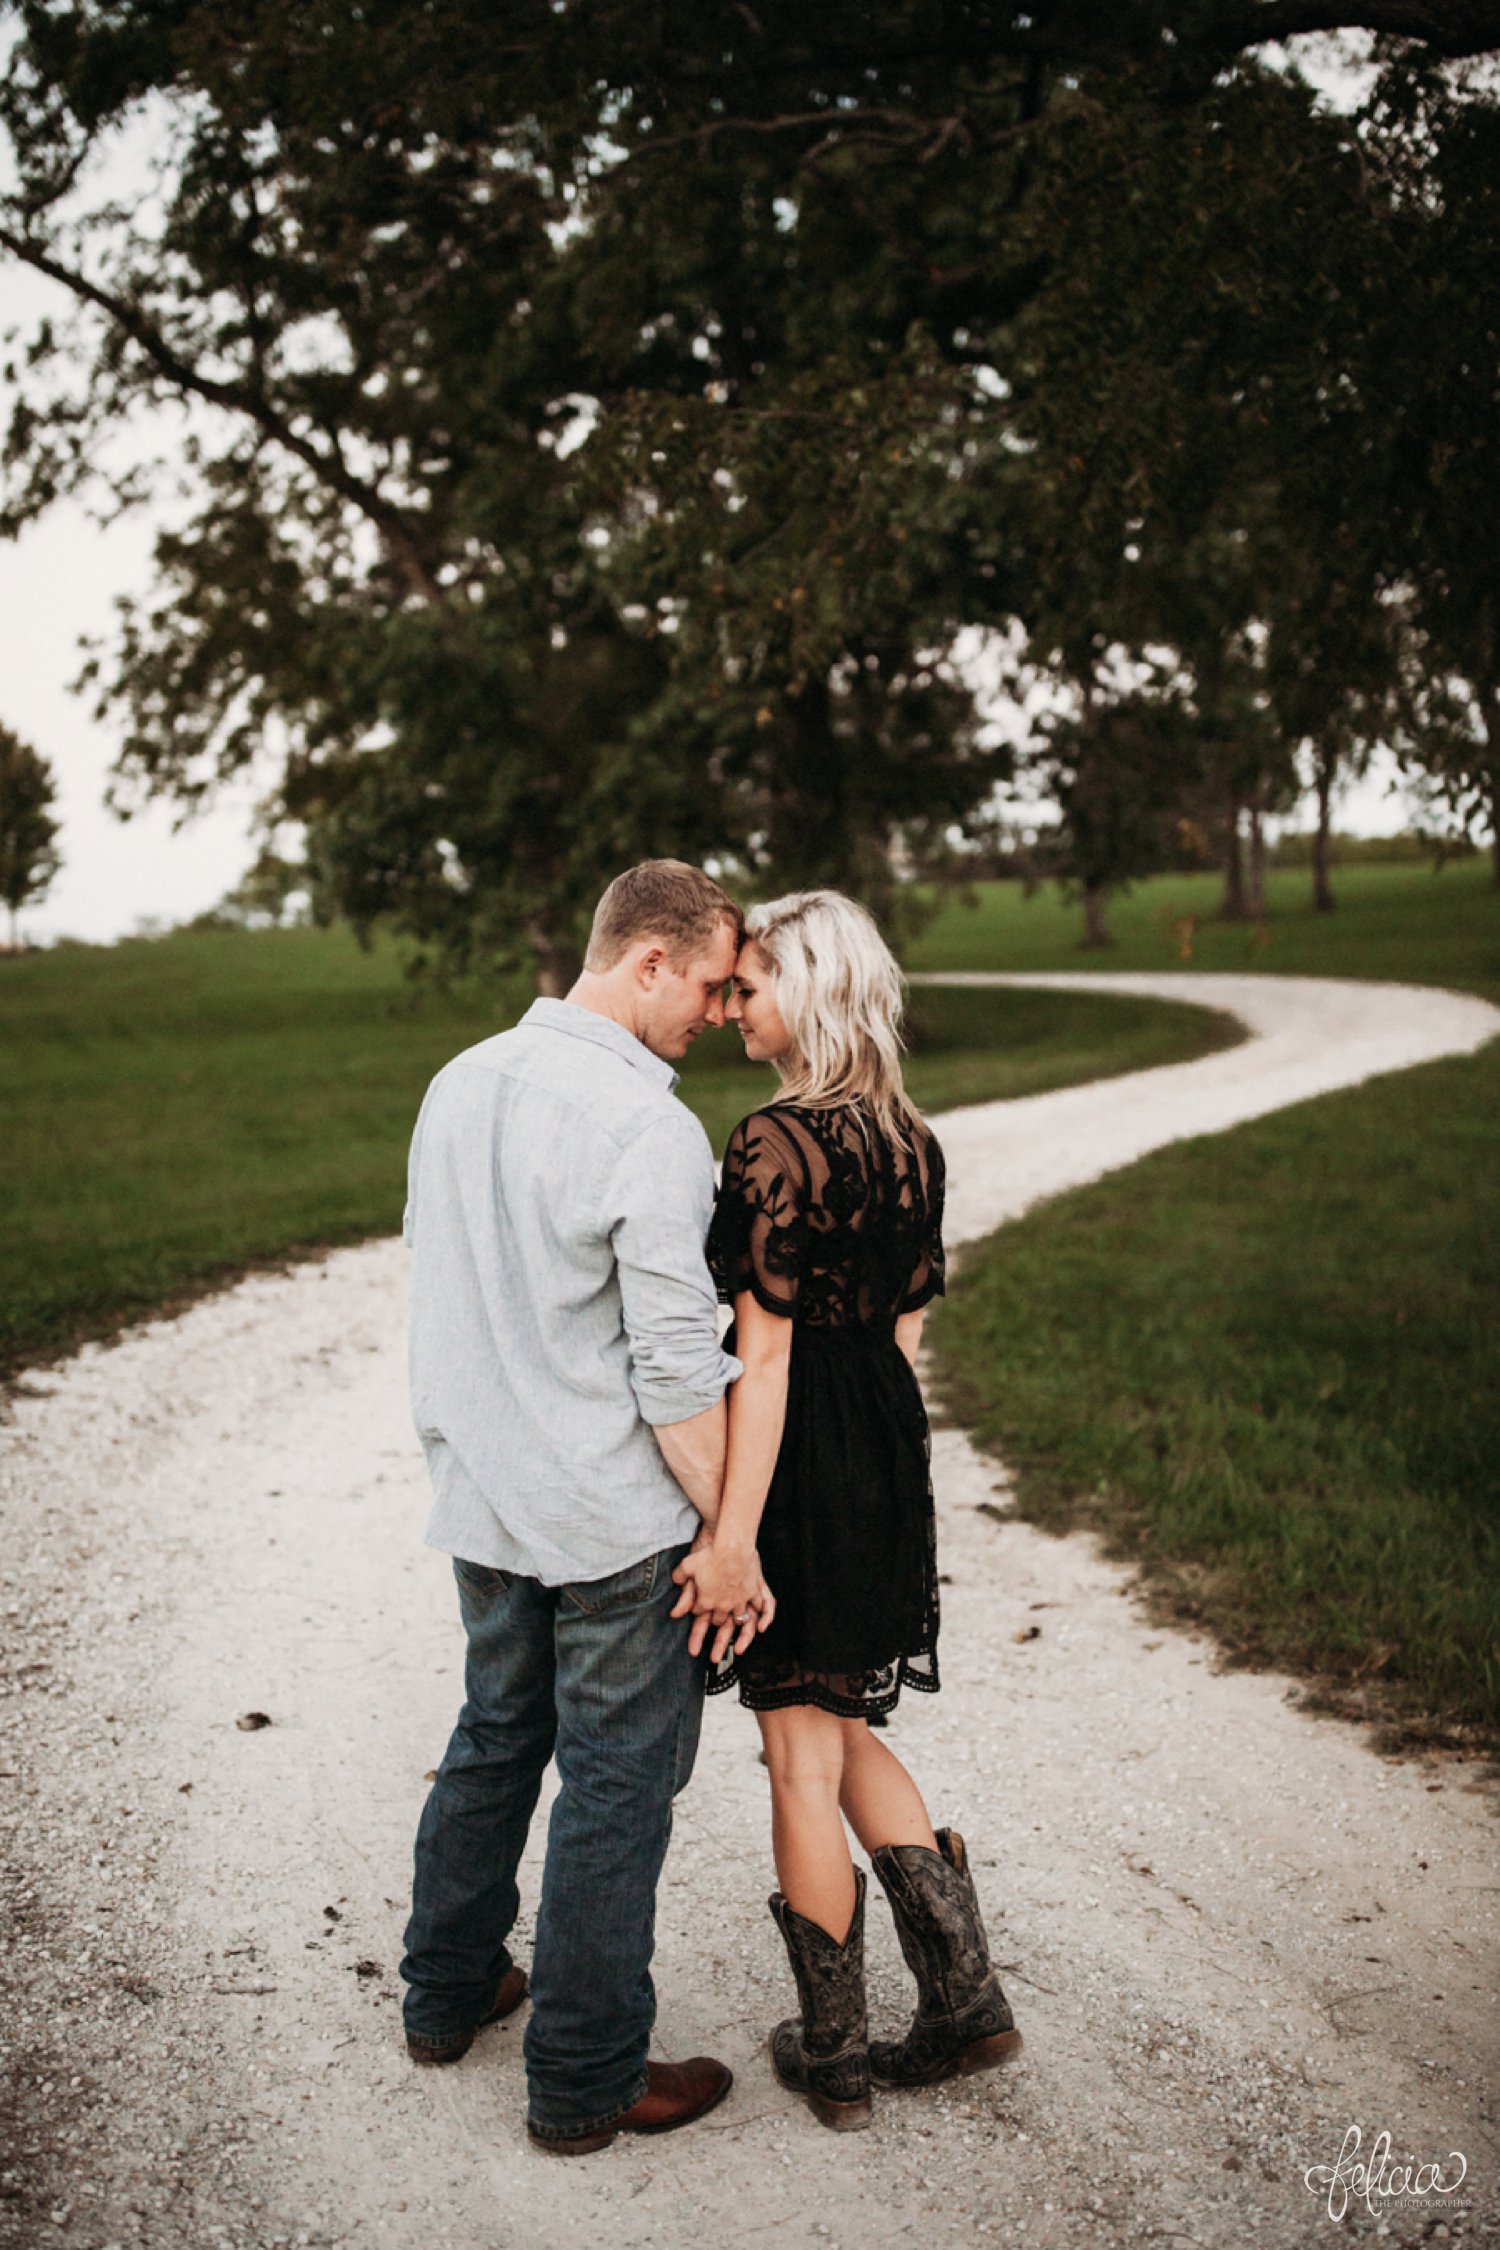 images by feliciathephotographer.com | destination wedding photographer | engagement | farmhouse | country | kansas city | sweet southern | black eyelet romper | unique halo diamond ring | casual | black boots | amazon | cowboy | red nails | nature | black and white | holding hands | gravel road | 